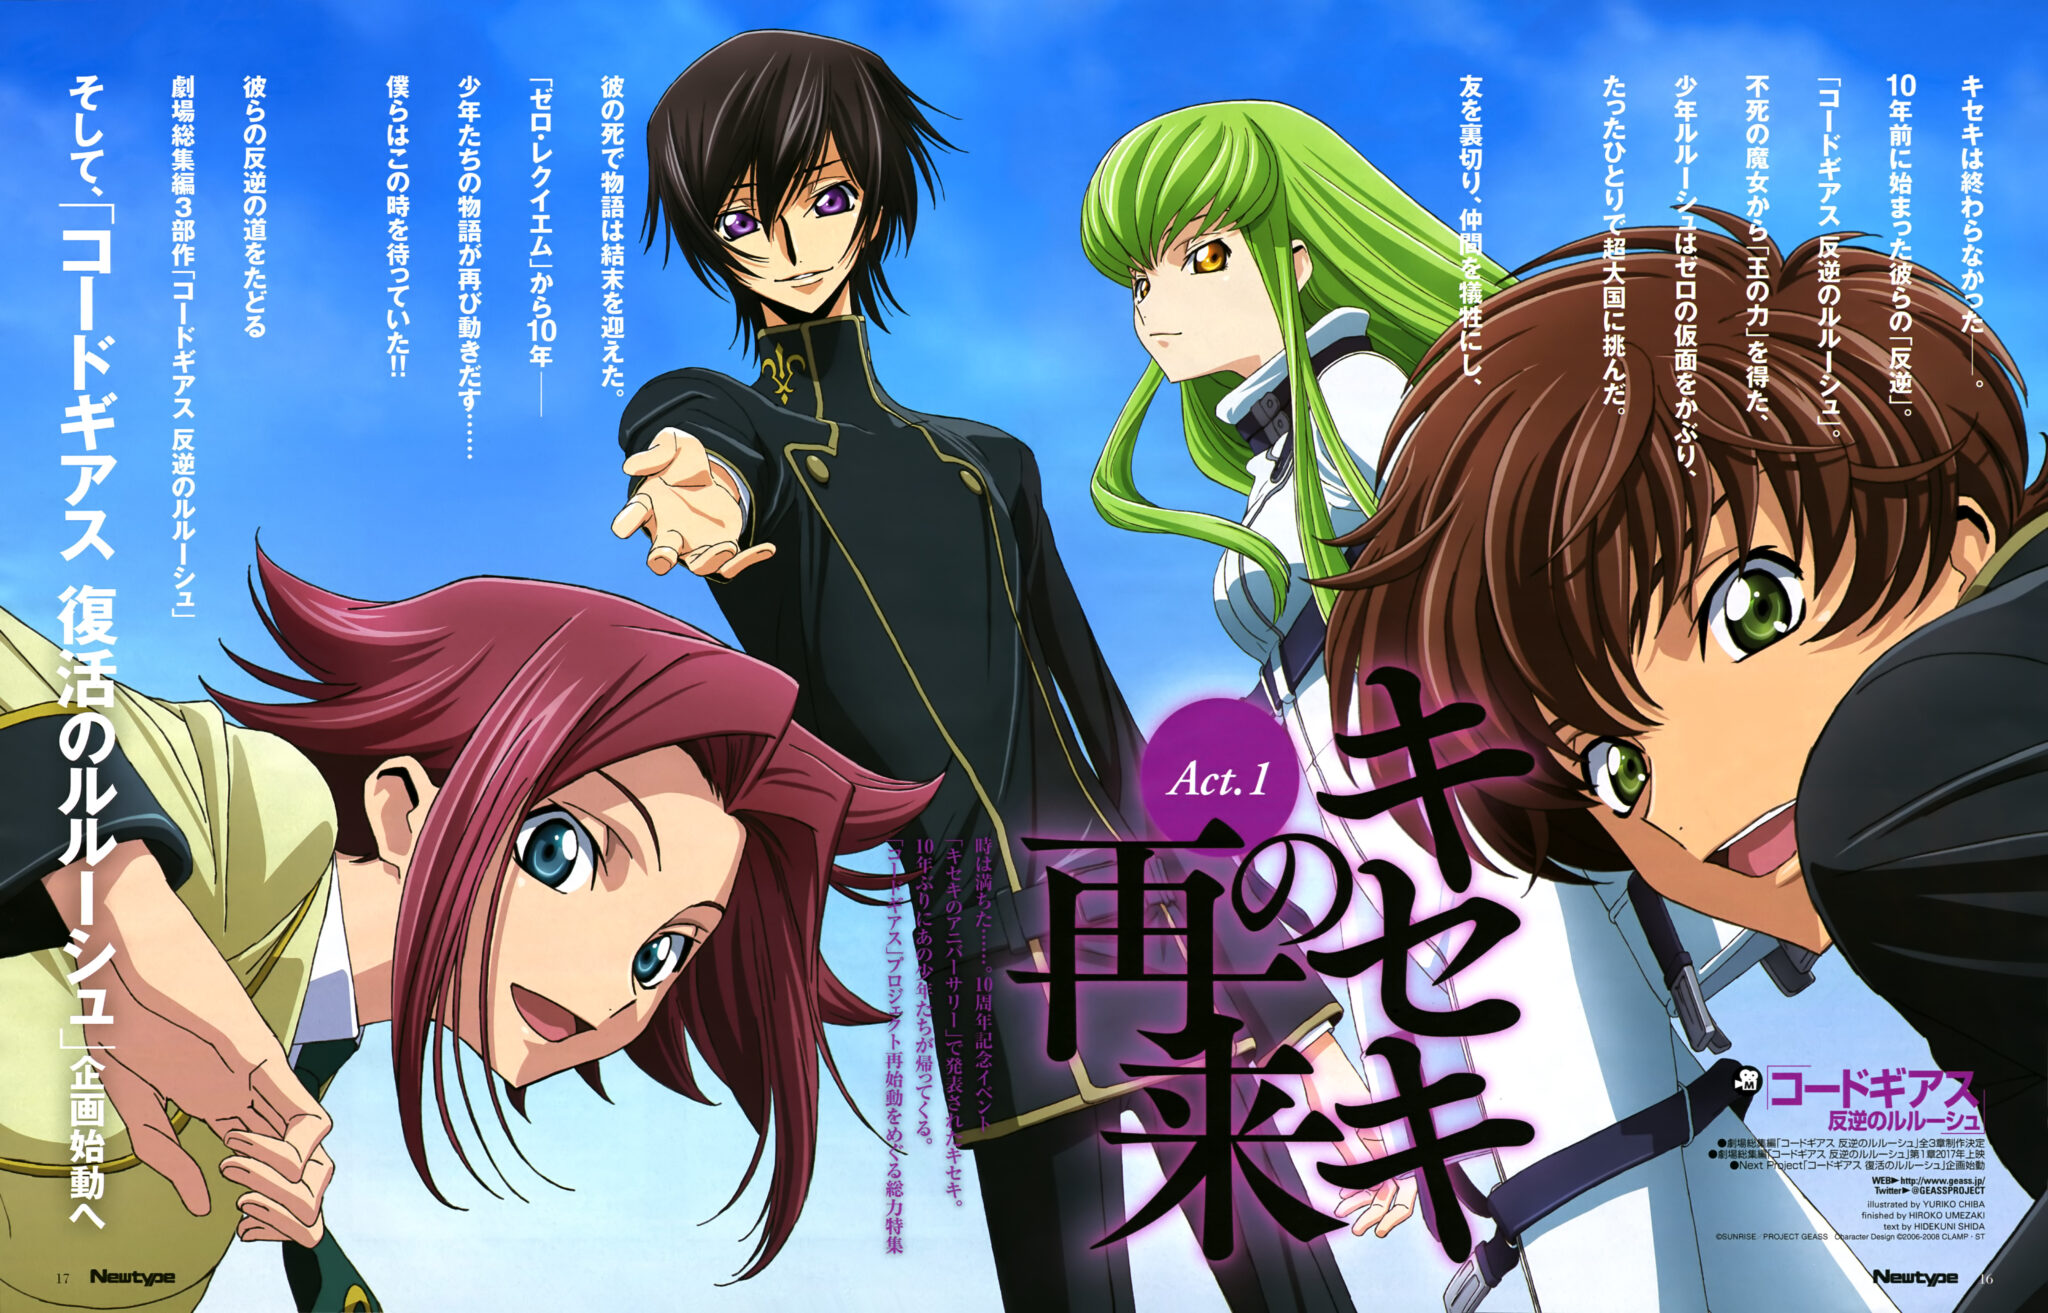 Code Geass Watch order, release order and plot details The Click